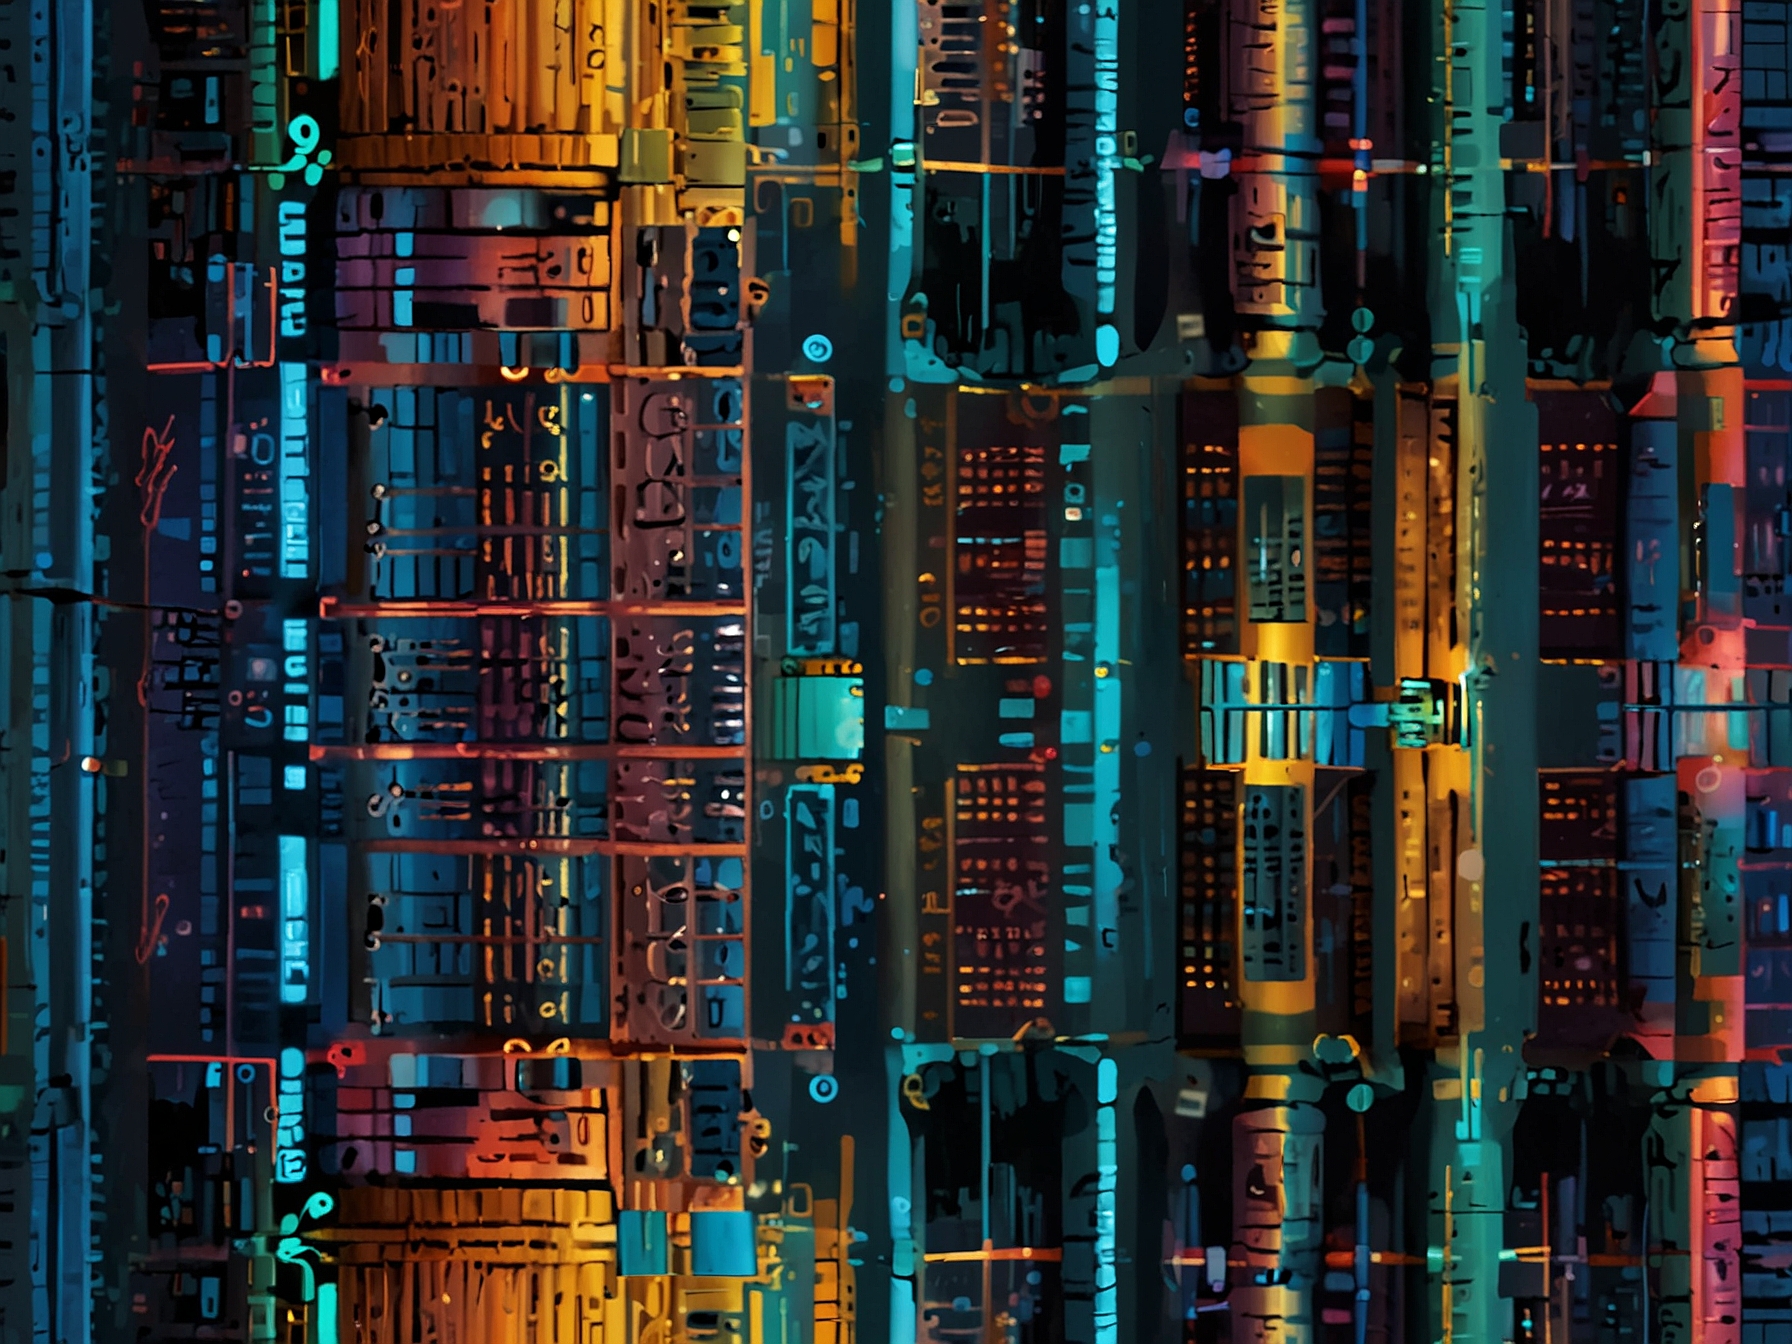 A futuristic graphic showing a cross-section of a 1,000 layer NAND memory chip, highlighting the dense stacking of layers. Arrows point to sections illustrating increased storage capacity and efficiency.